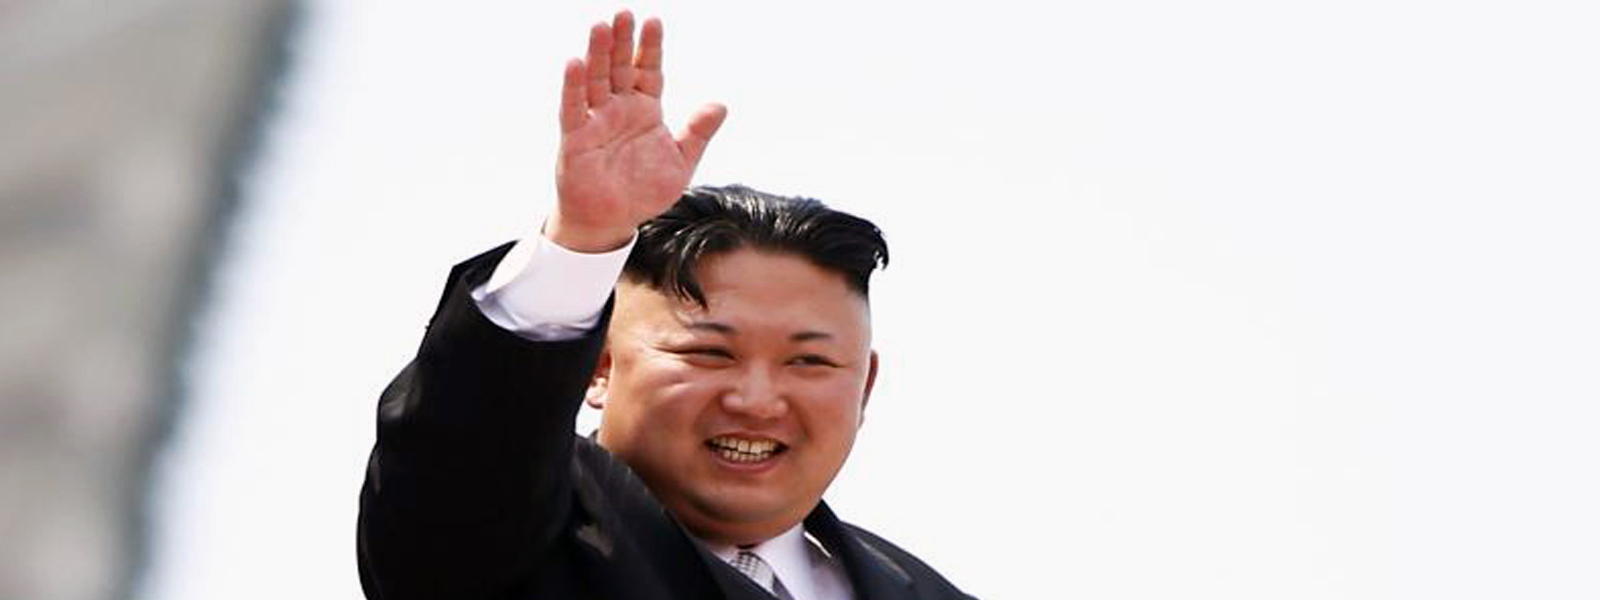 Kim Jong-un 'to advance' closer ties with South